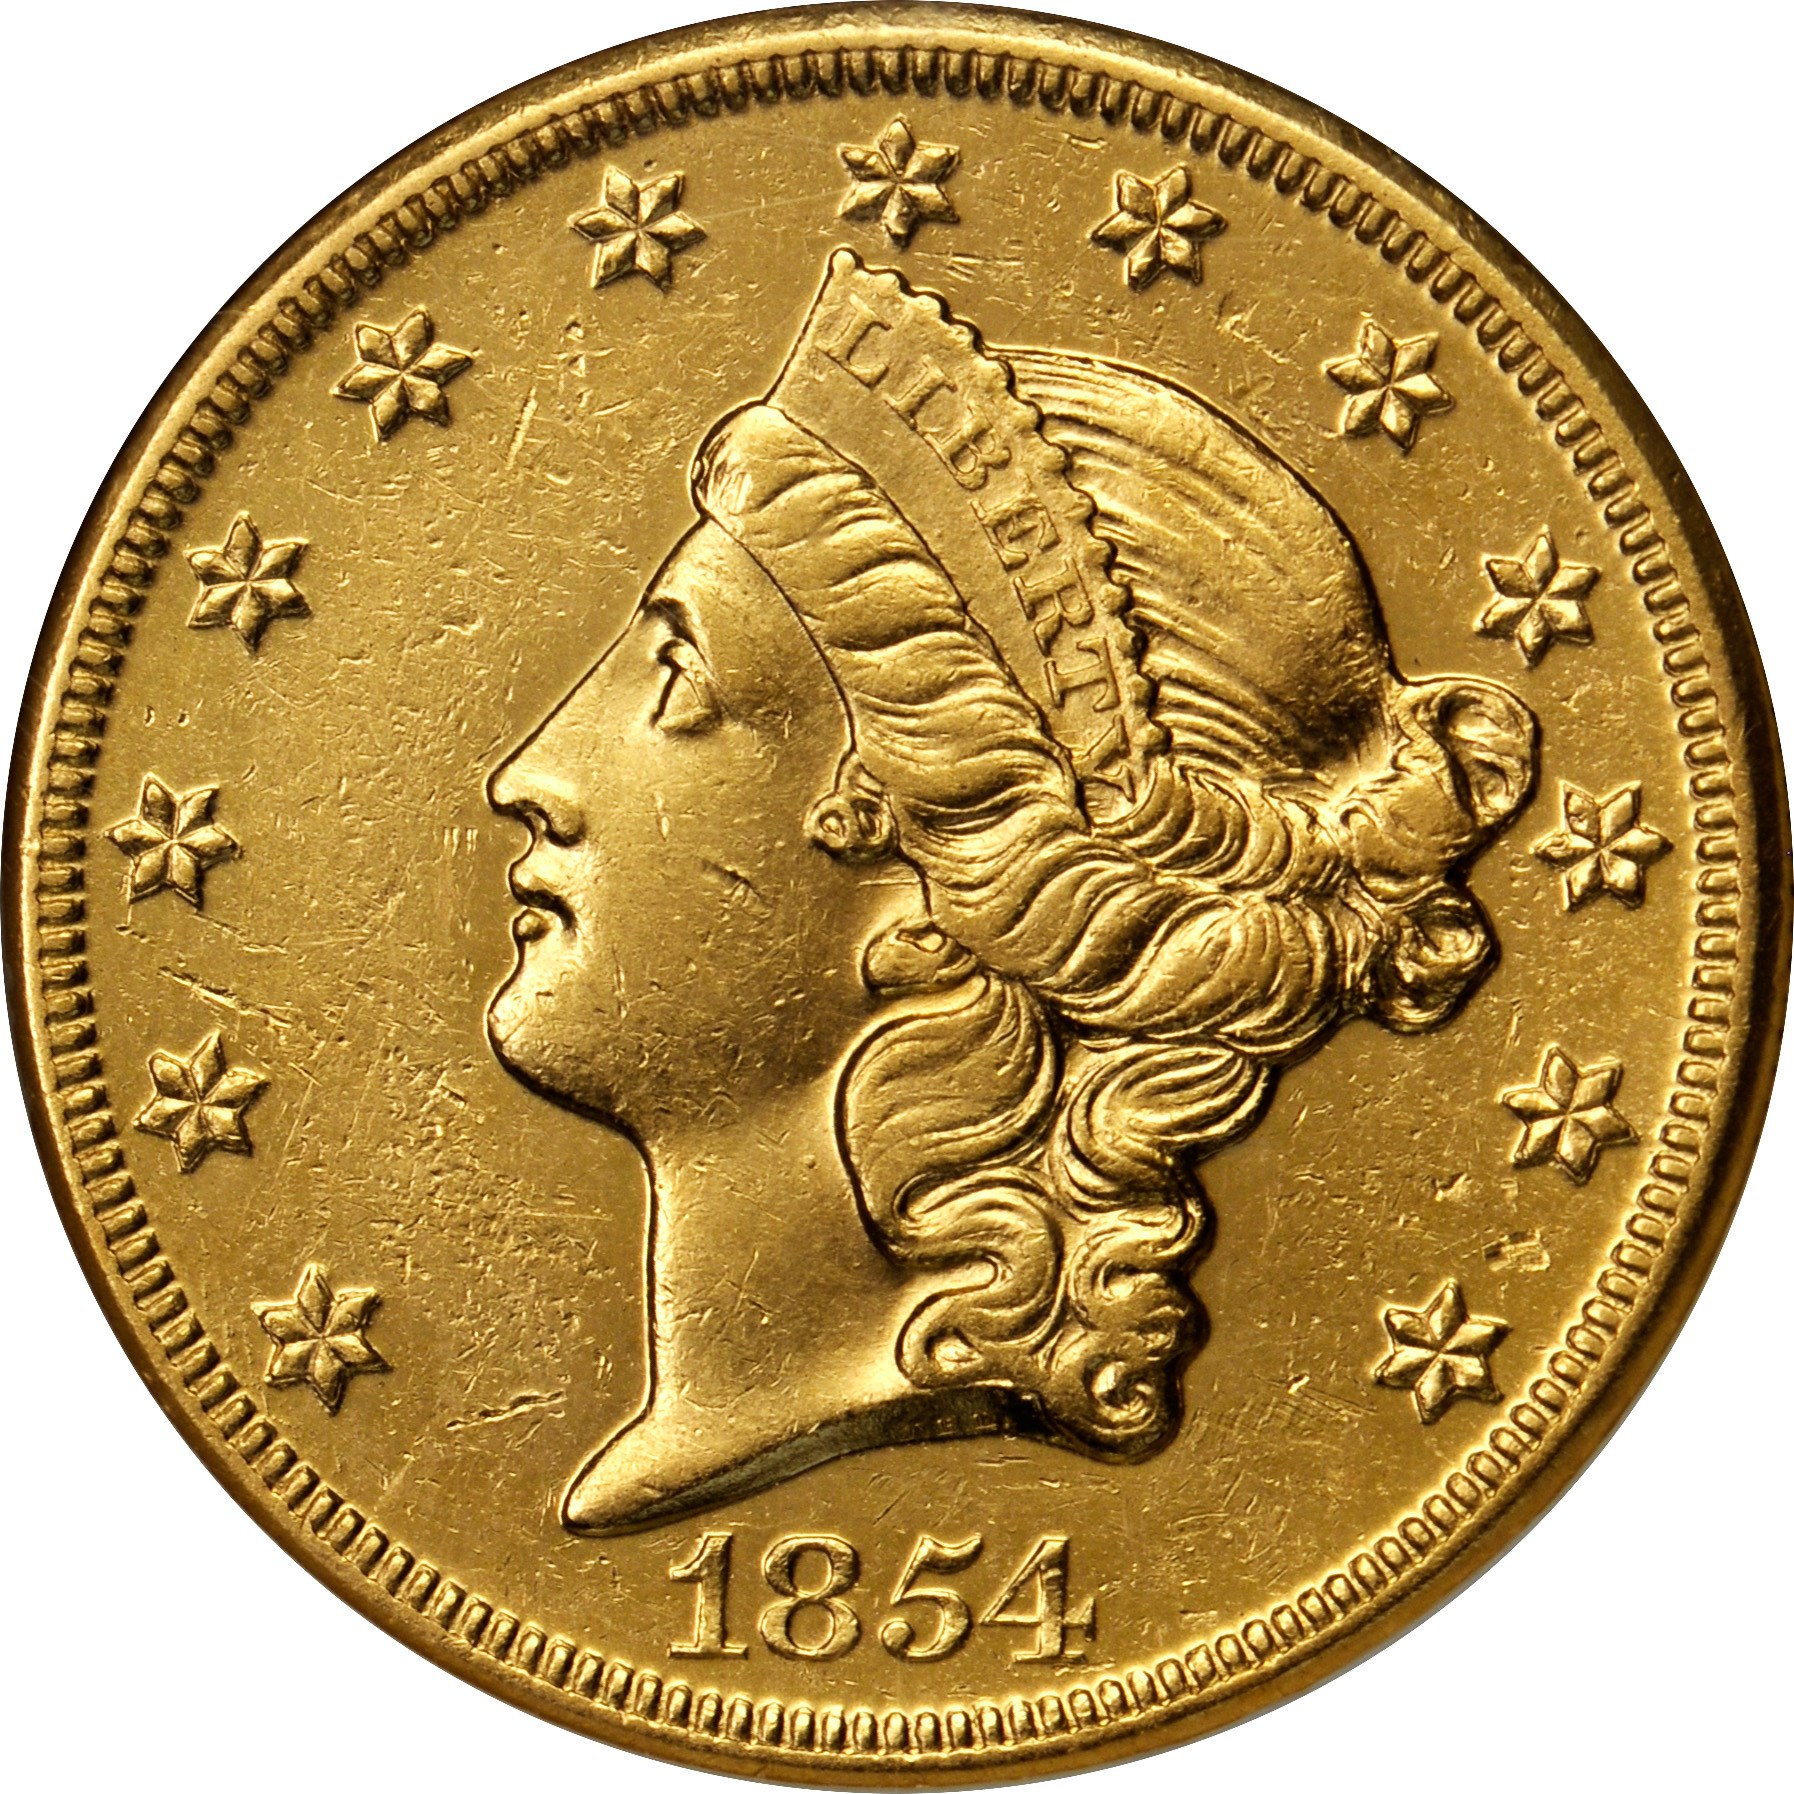 An $8 million collection of California Gold Rush-era gold coins will be displayed by Monaco Rare Coins and the set's anonymous owner at the World’s Fair of Money® in Anaheim, Aug. 9 - 13, 2016.